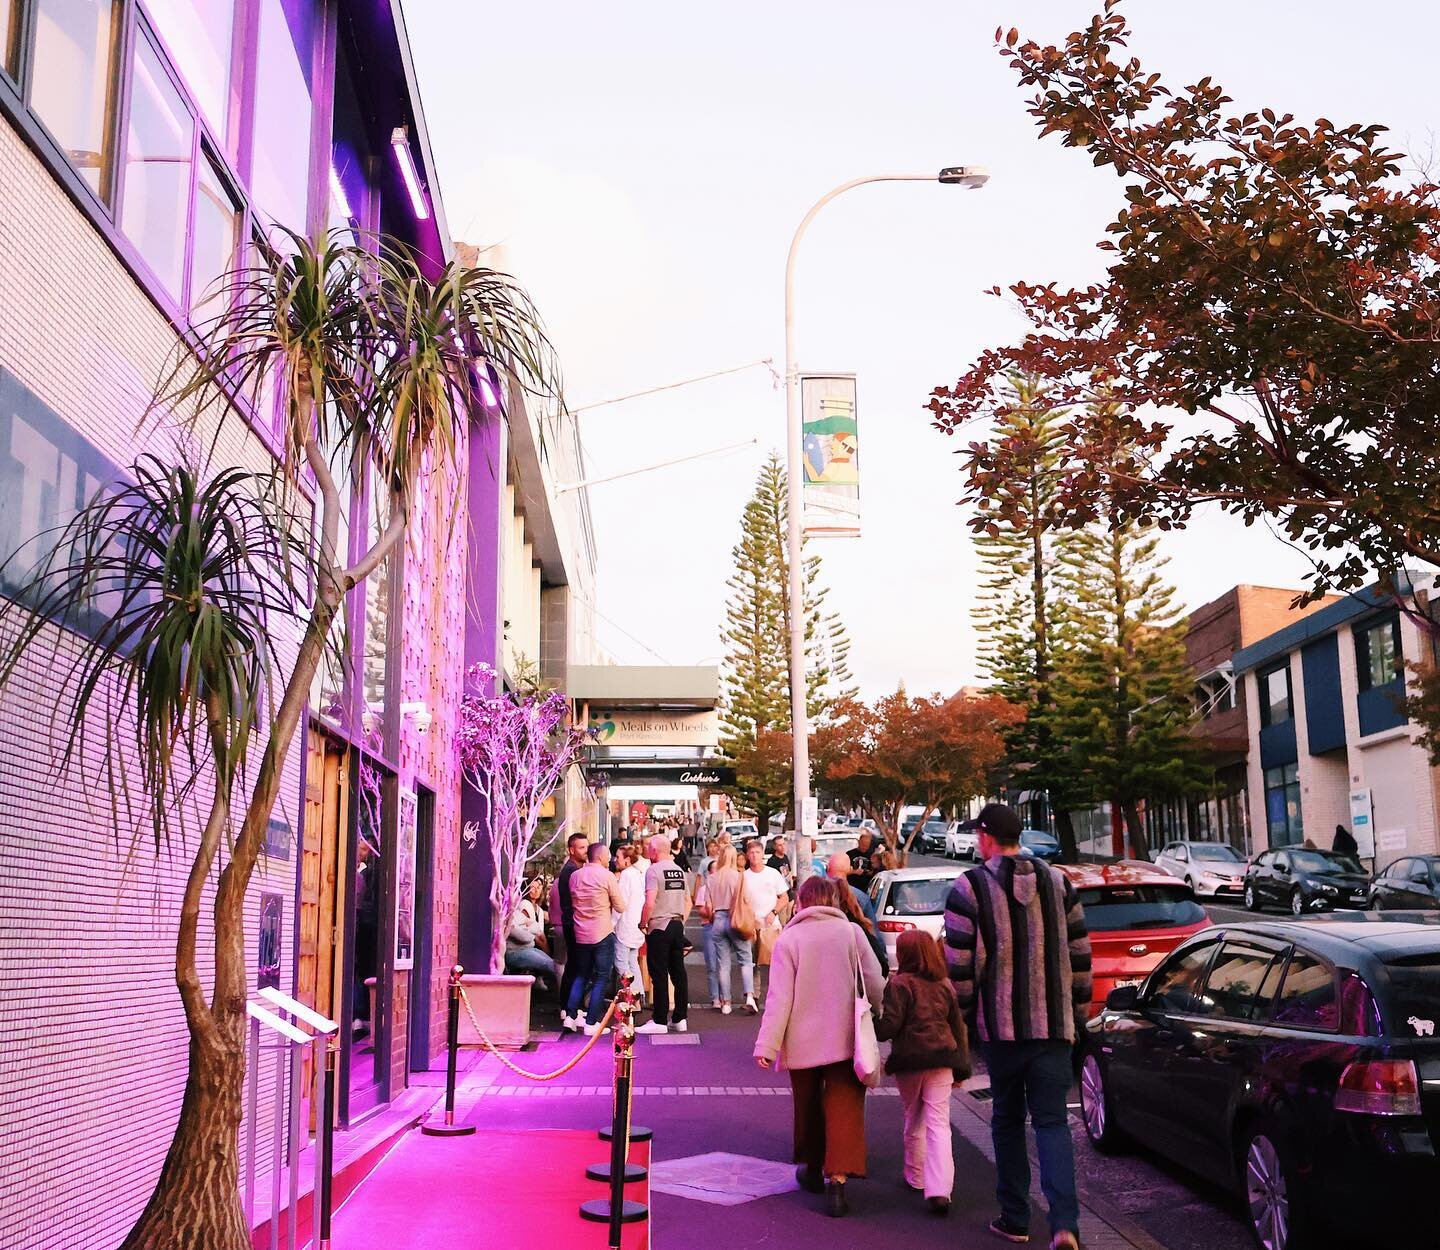 What an awesome evening down @portkemblafestival ⚡️
With live music, good food, local markets and groovy bars, Wentworth street is the place to be this Saturday night! ⚡️💃

Congrats @theironyampi on opening night! What a success 👏🏻
.
.
#portkembla